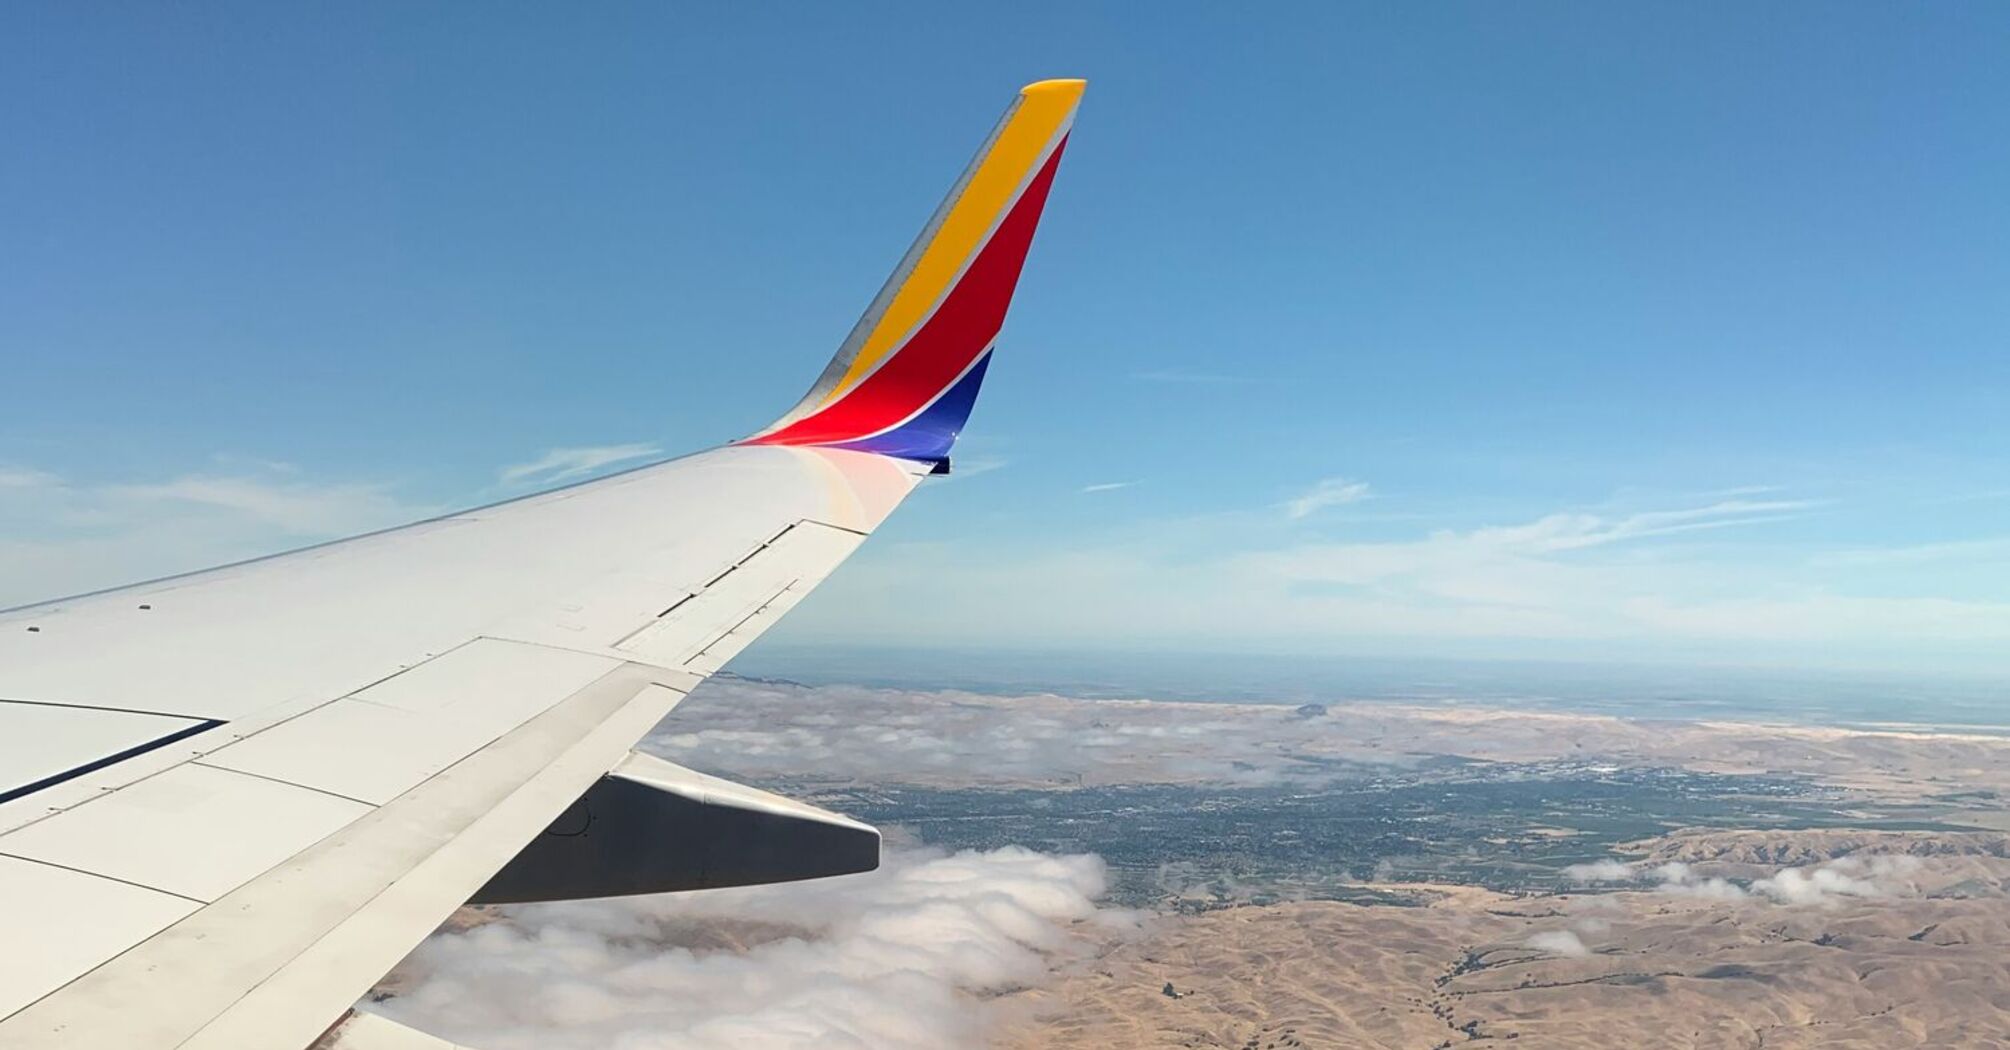 View from a Southwest Airlines plane window showing the wing and landscape below with clouds and hills